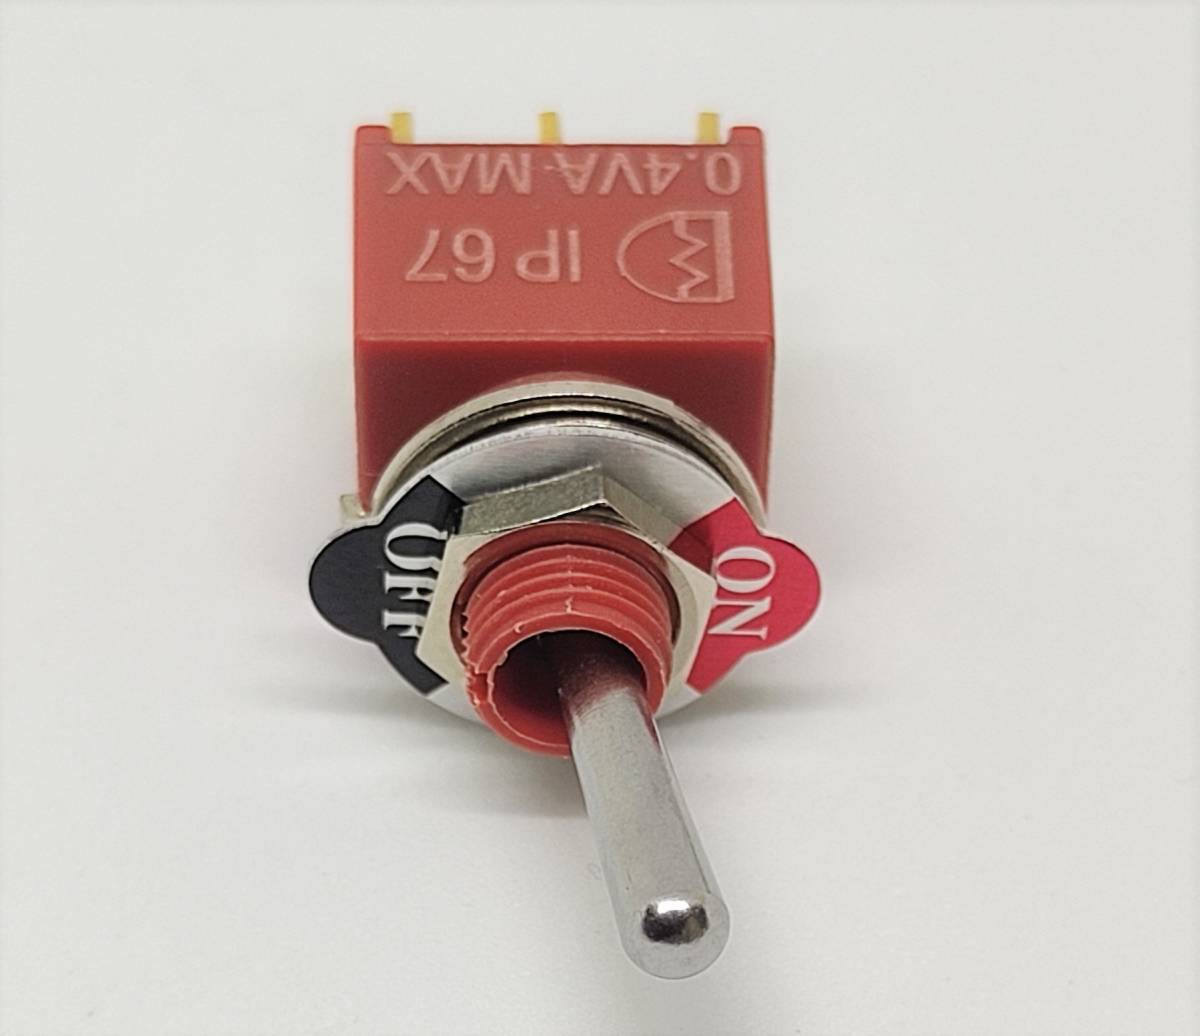  waterproof toggle switch 2 circuit 2 contact waterproof * dustproof performance IP67 panel installation for small size type ON|OFF character board attaching switch ON OFF 2 circuit waterproof 